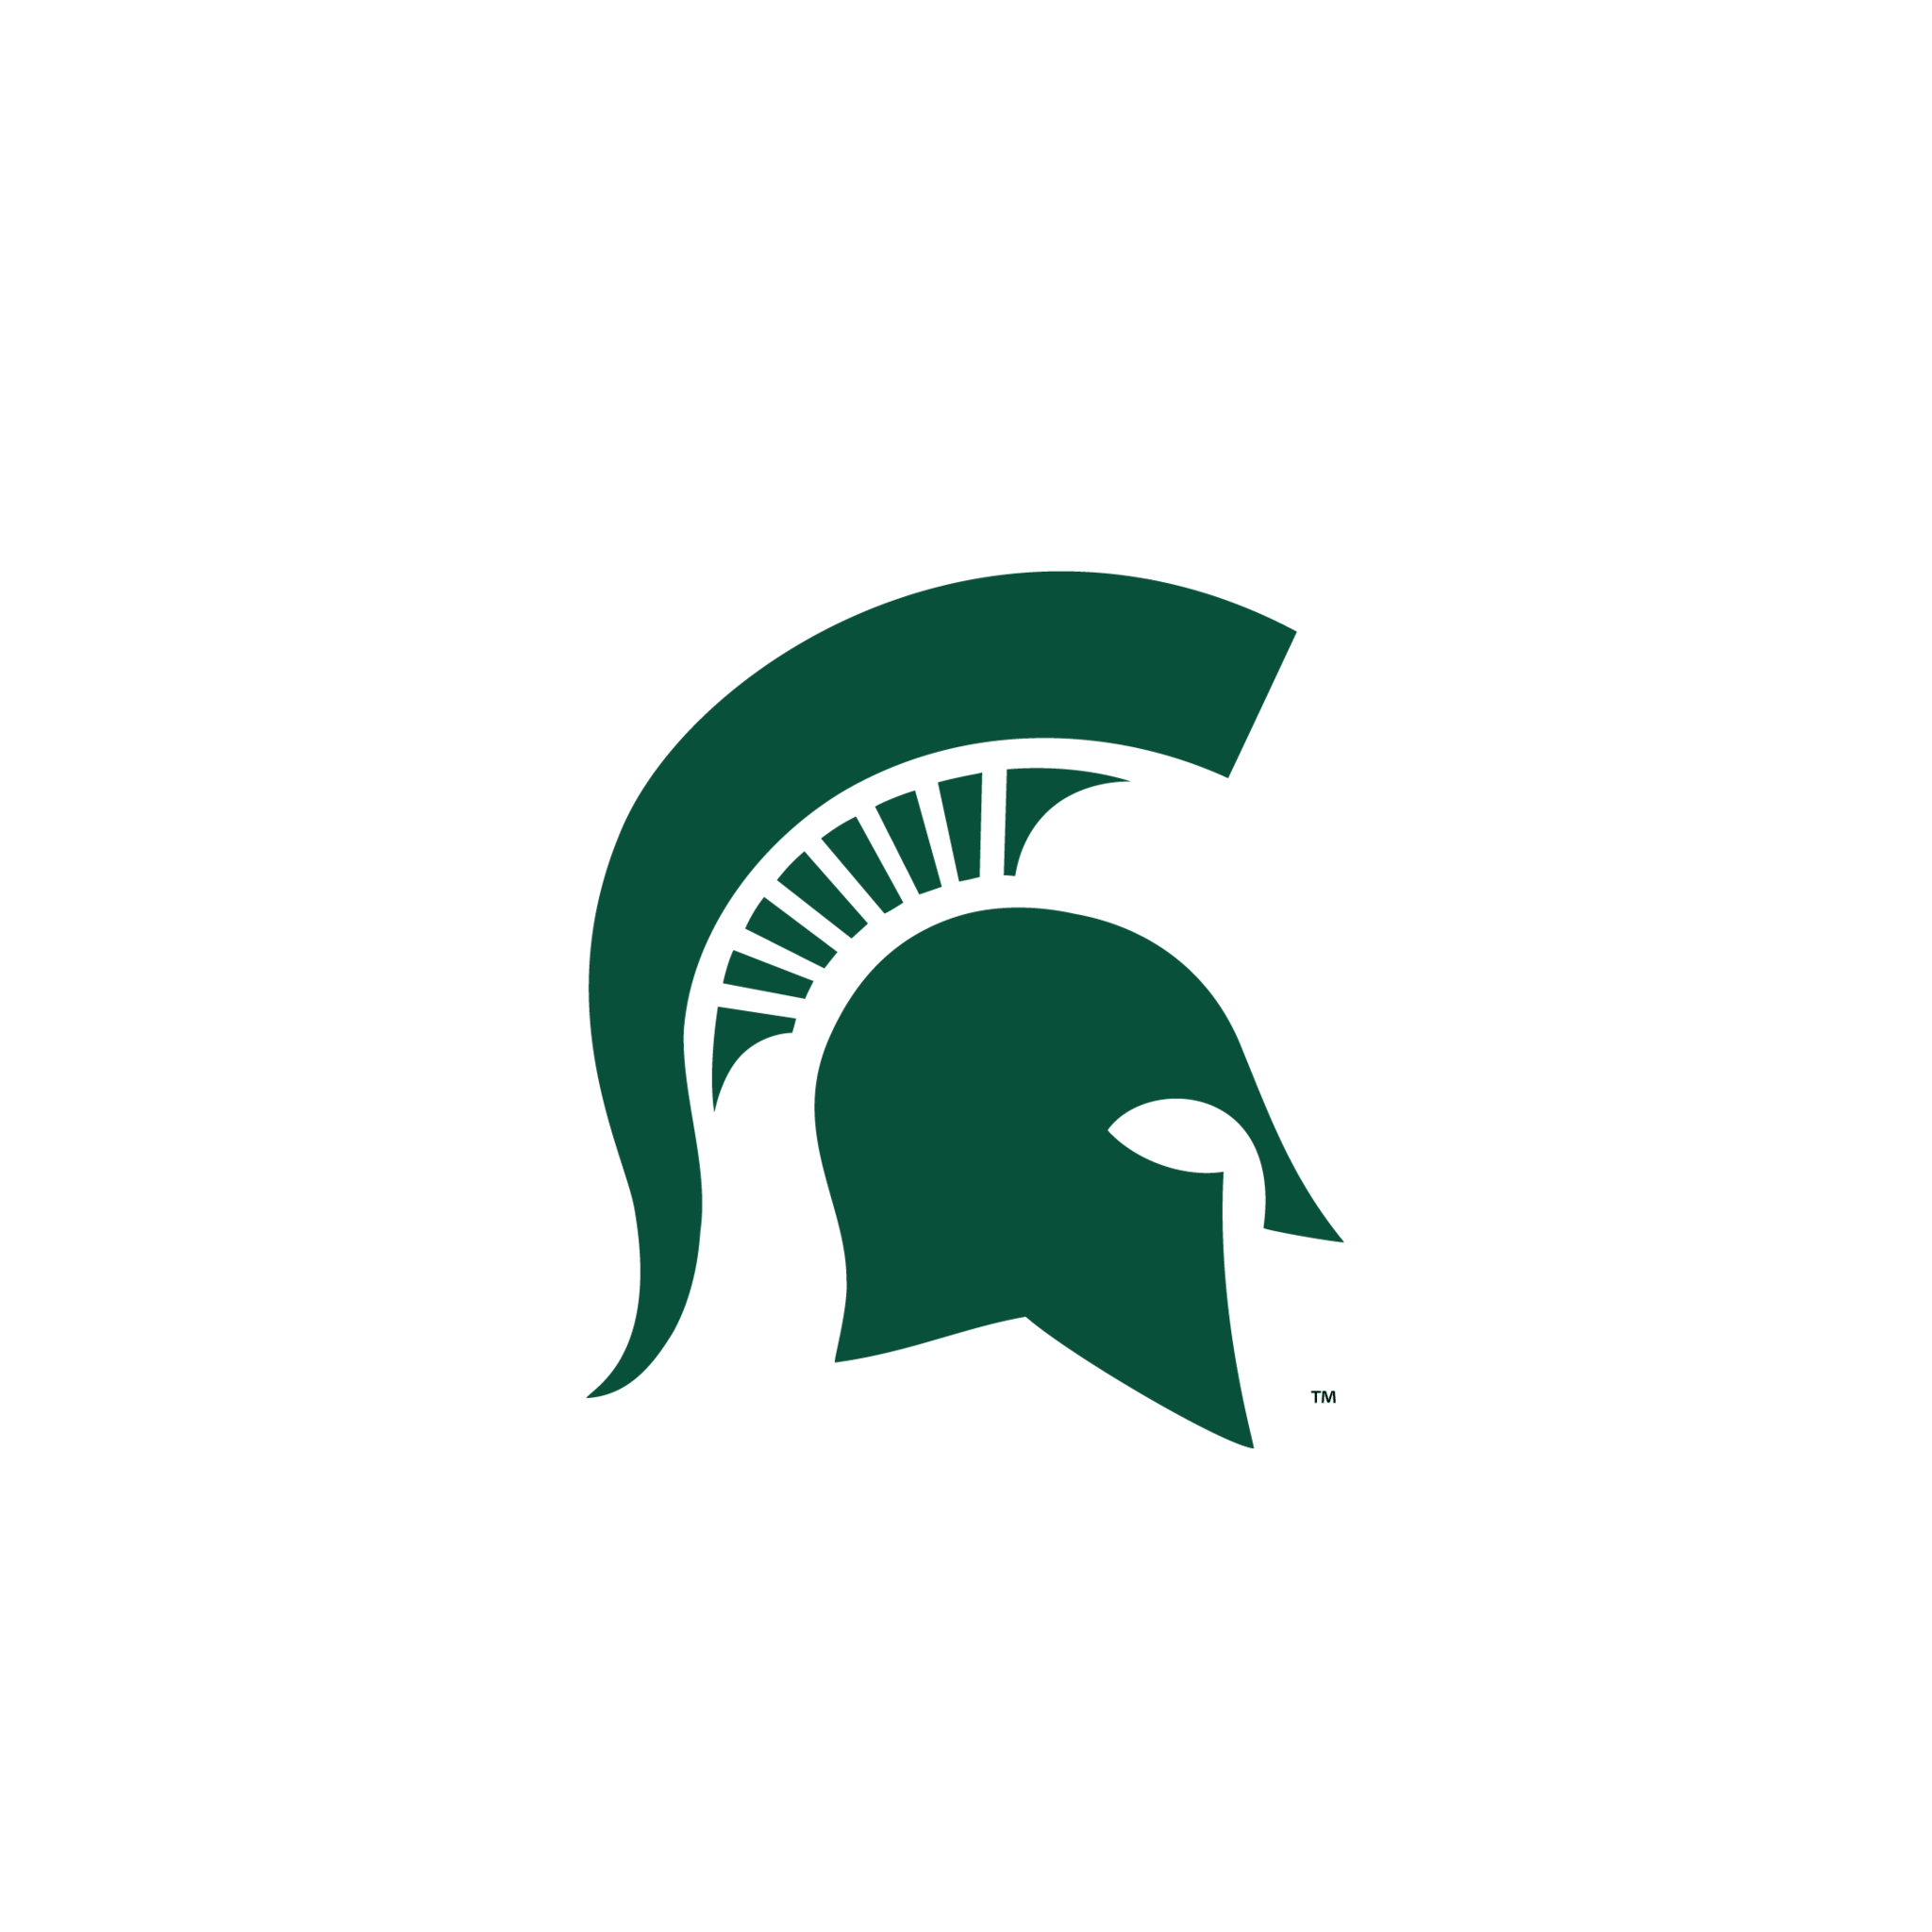 1000+ images about Michigan state | Logos, Models and ...